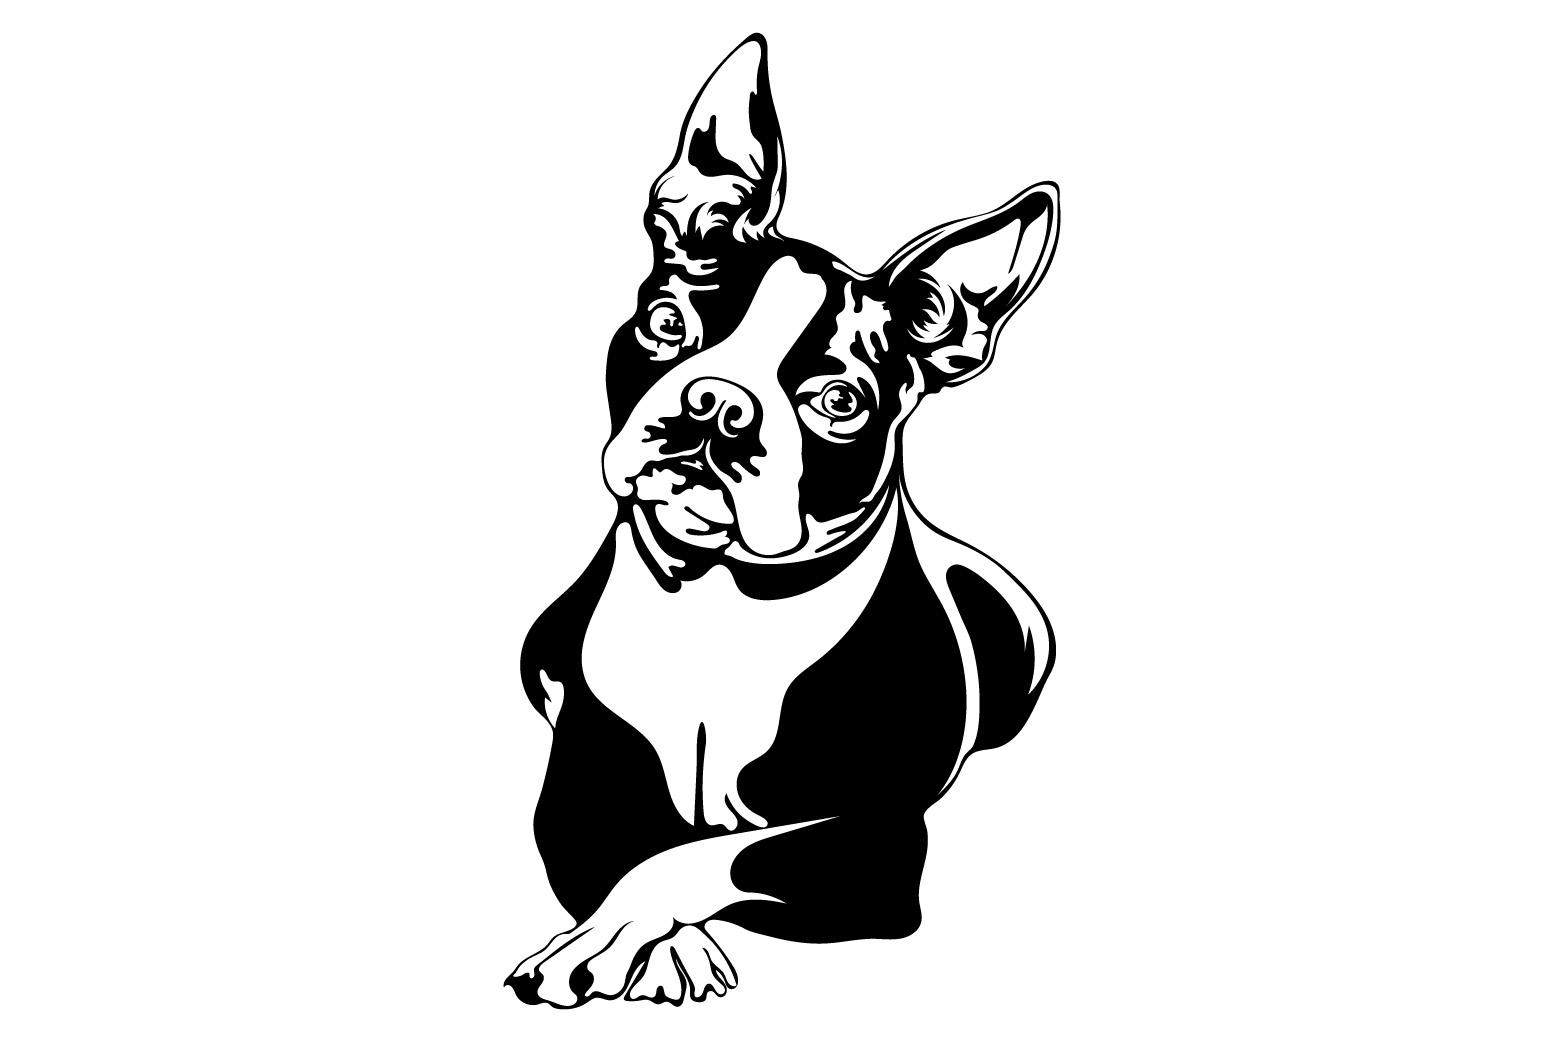 Black and white drawing of a dog.